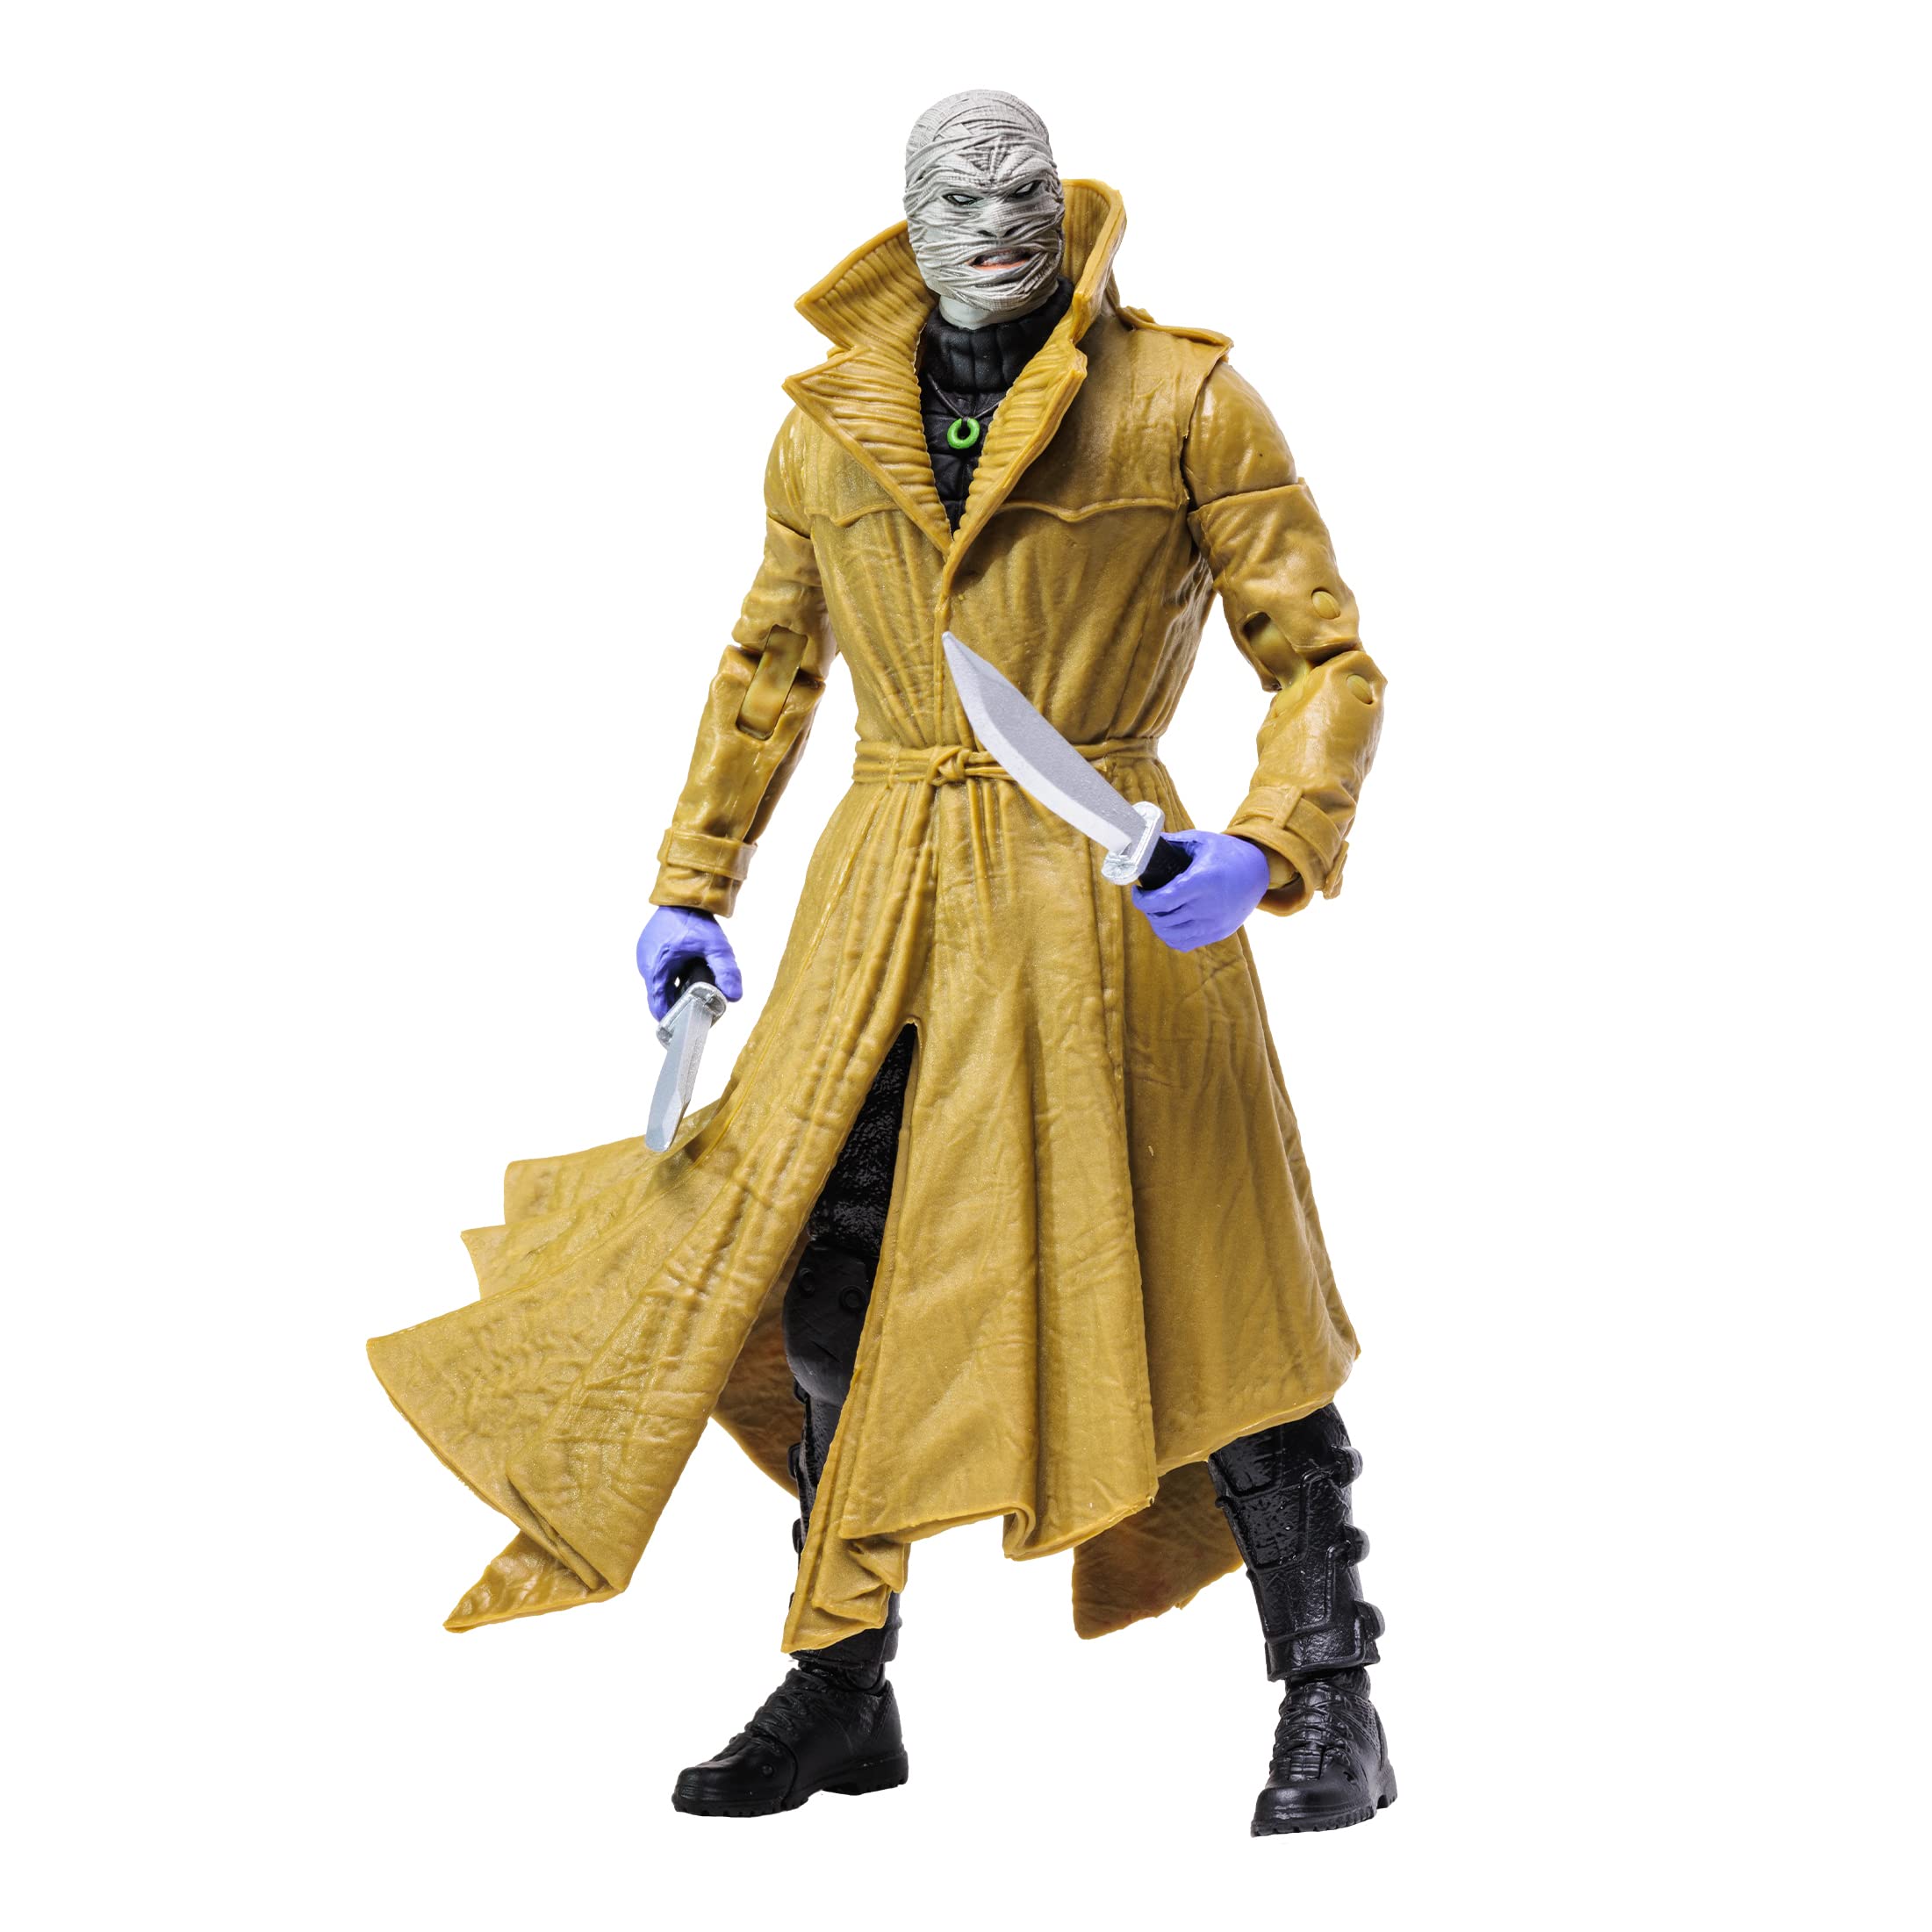 7" McFarlane Toys DC Multiverse Hush Action Figure w/ Accessories $7.19 + Free Shipping w/ Prime or on $35+